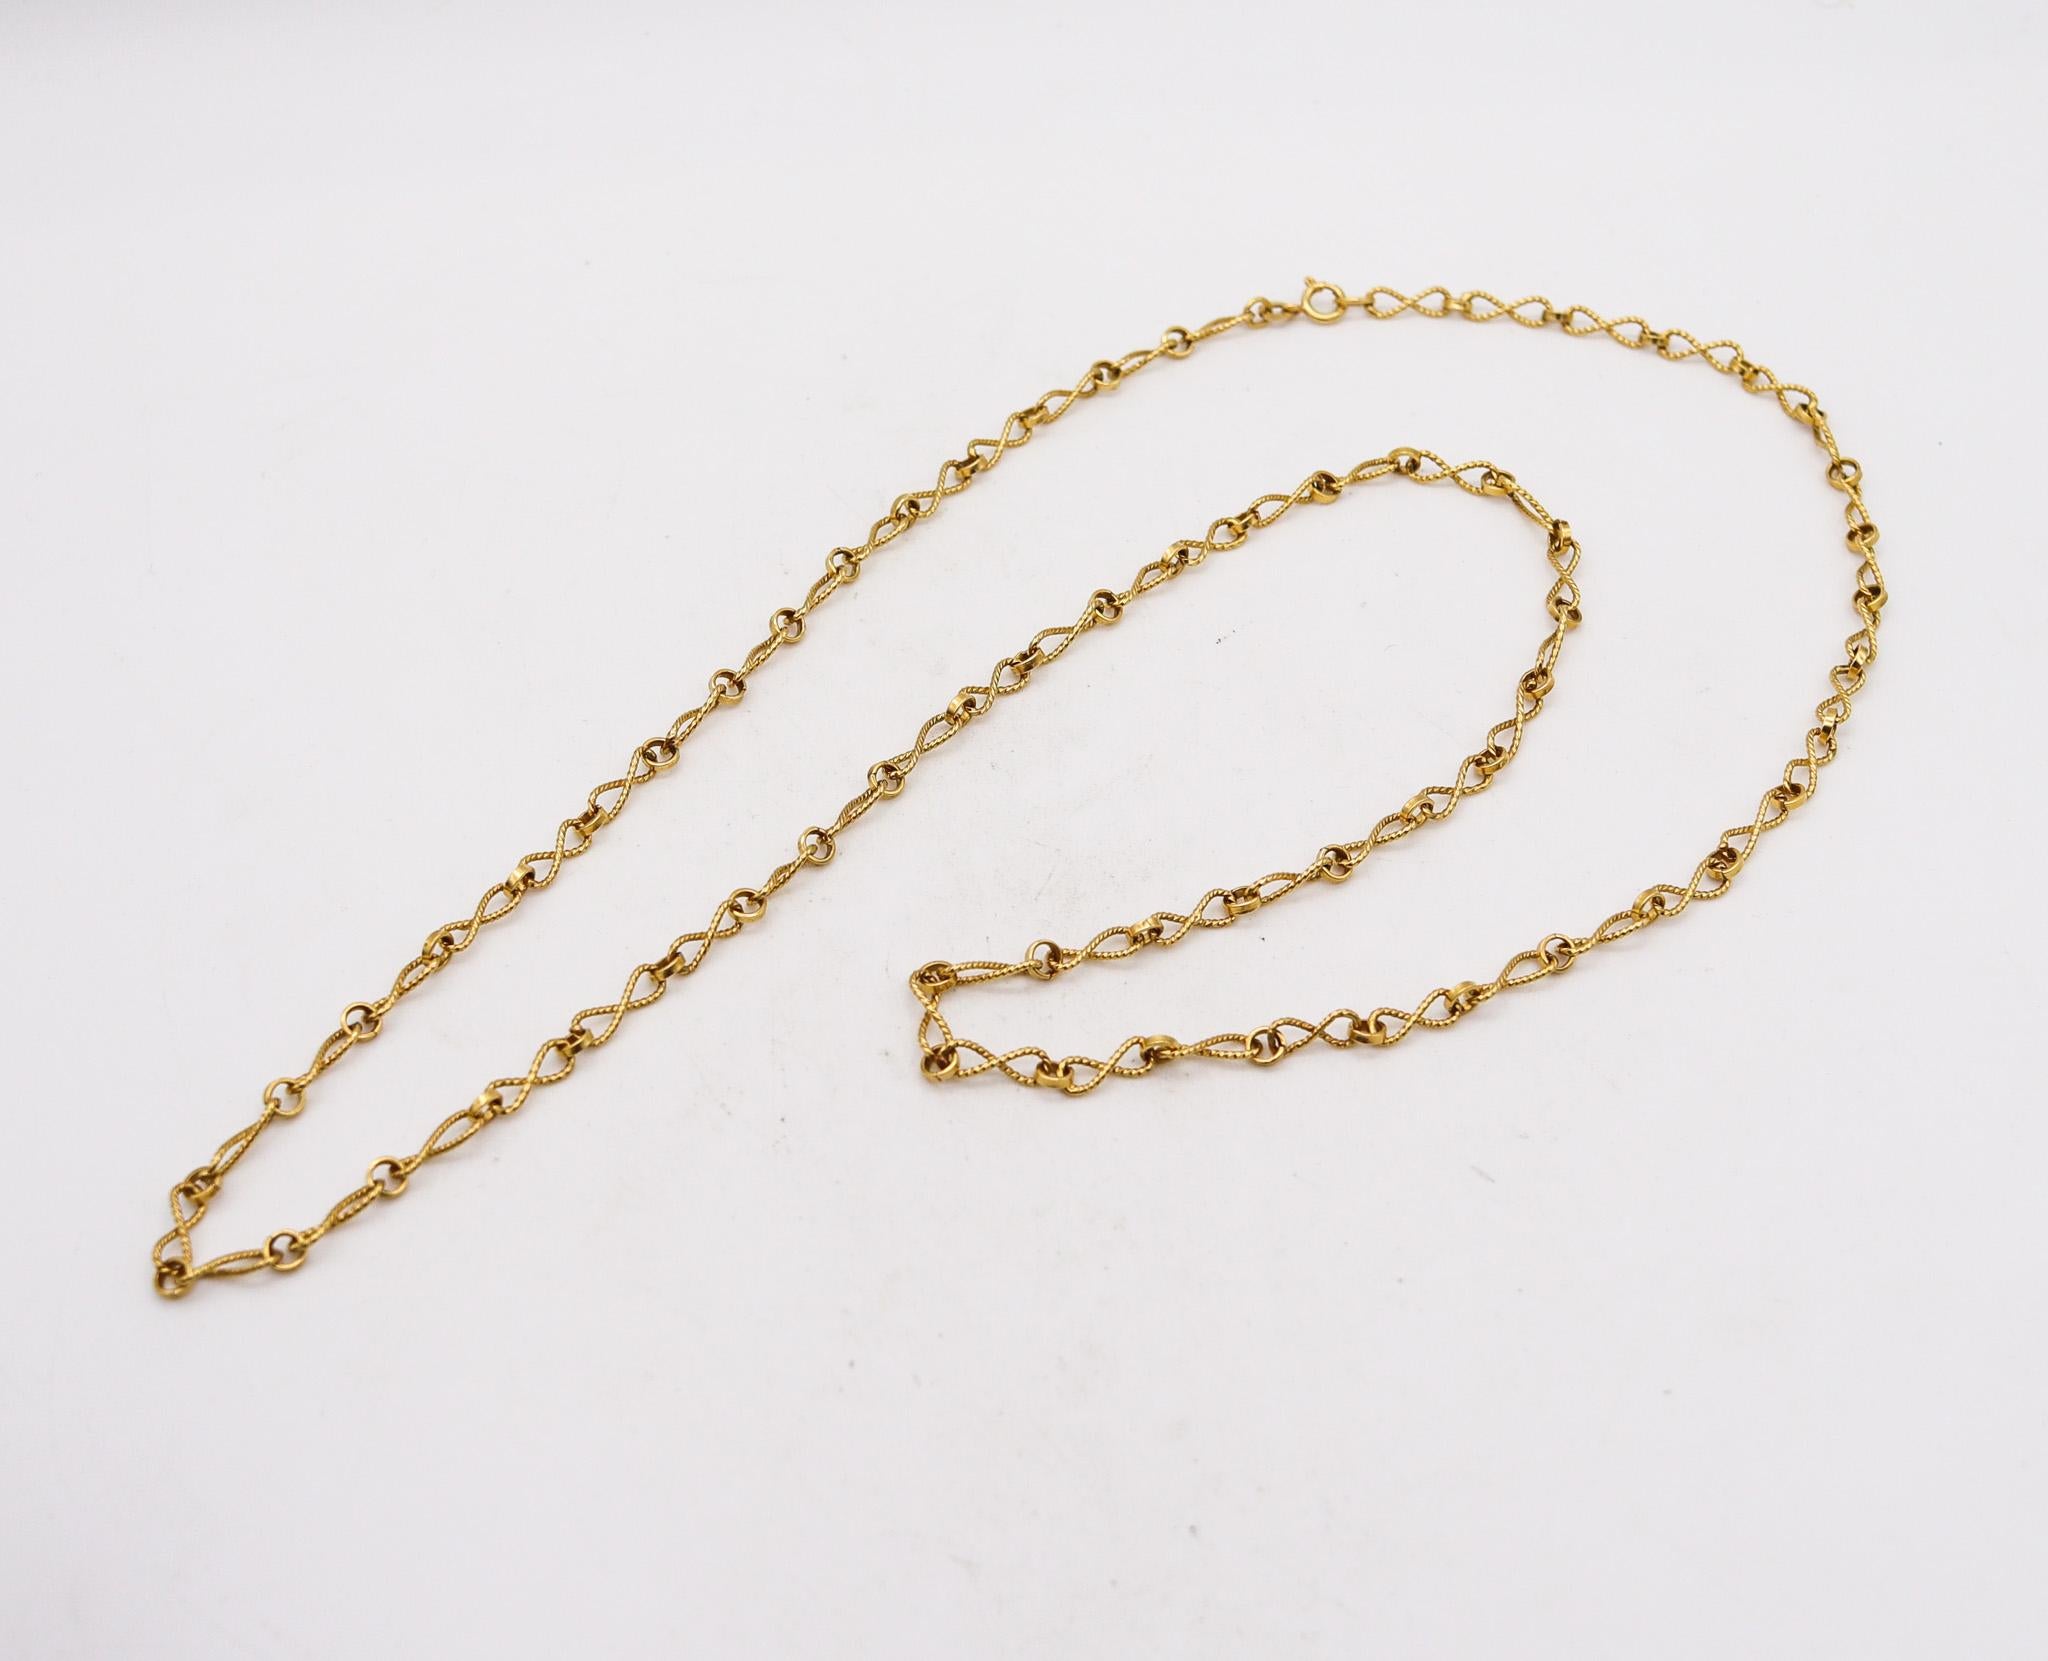 Alessi Domenico 1970 Retro Modern Twisted Long Chain In Solid 18Kt Yellow Gold In Excellent Condition For Sale In Miami, FL